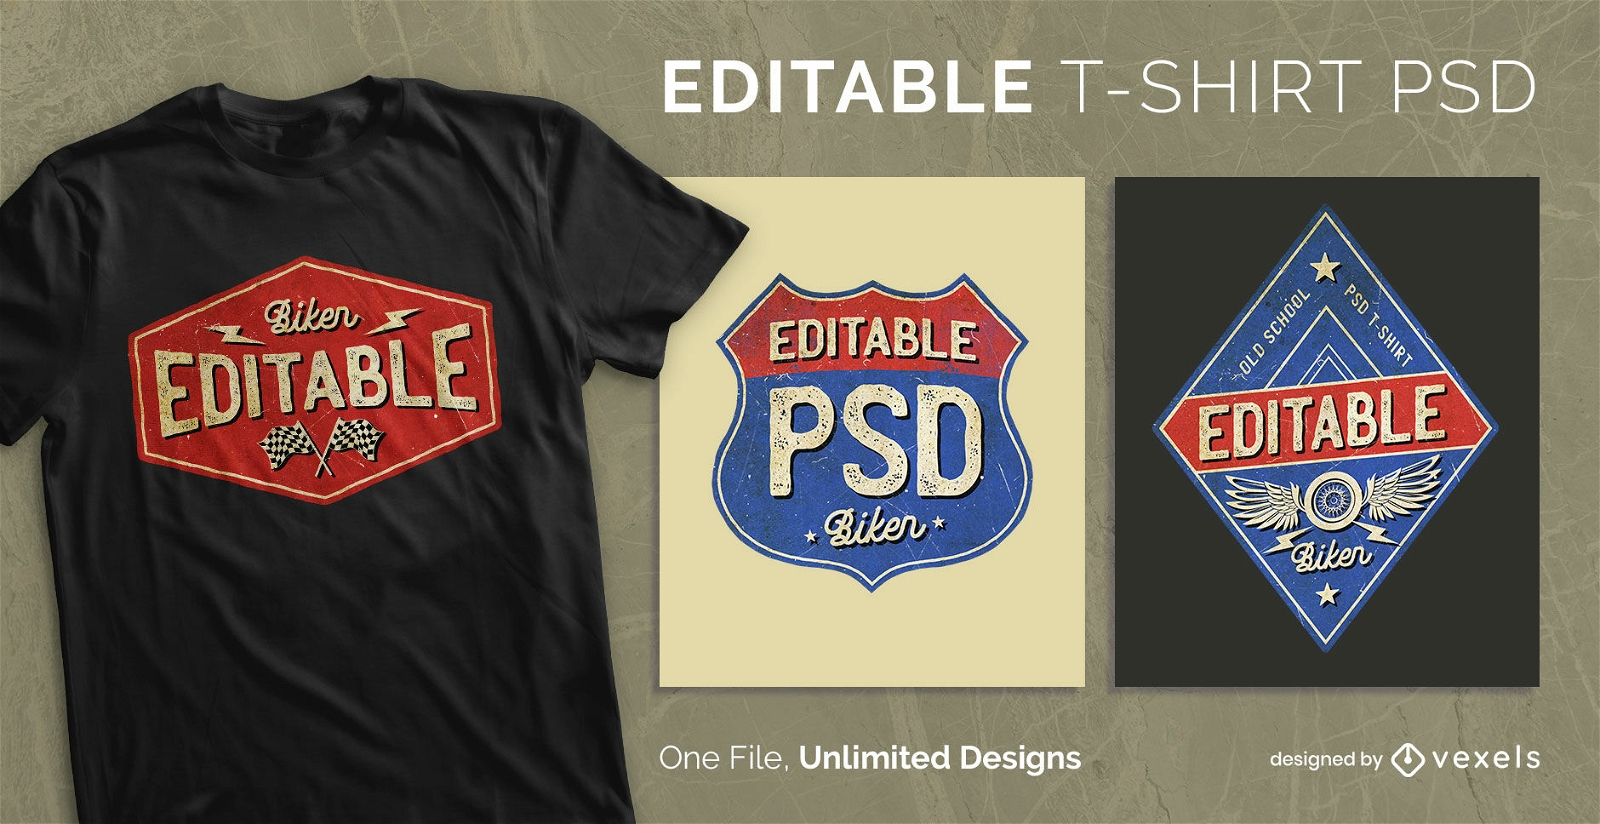 Vintage road signs scalable t-shirt psd